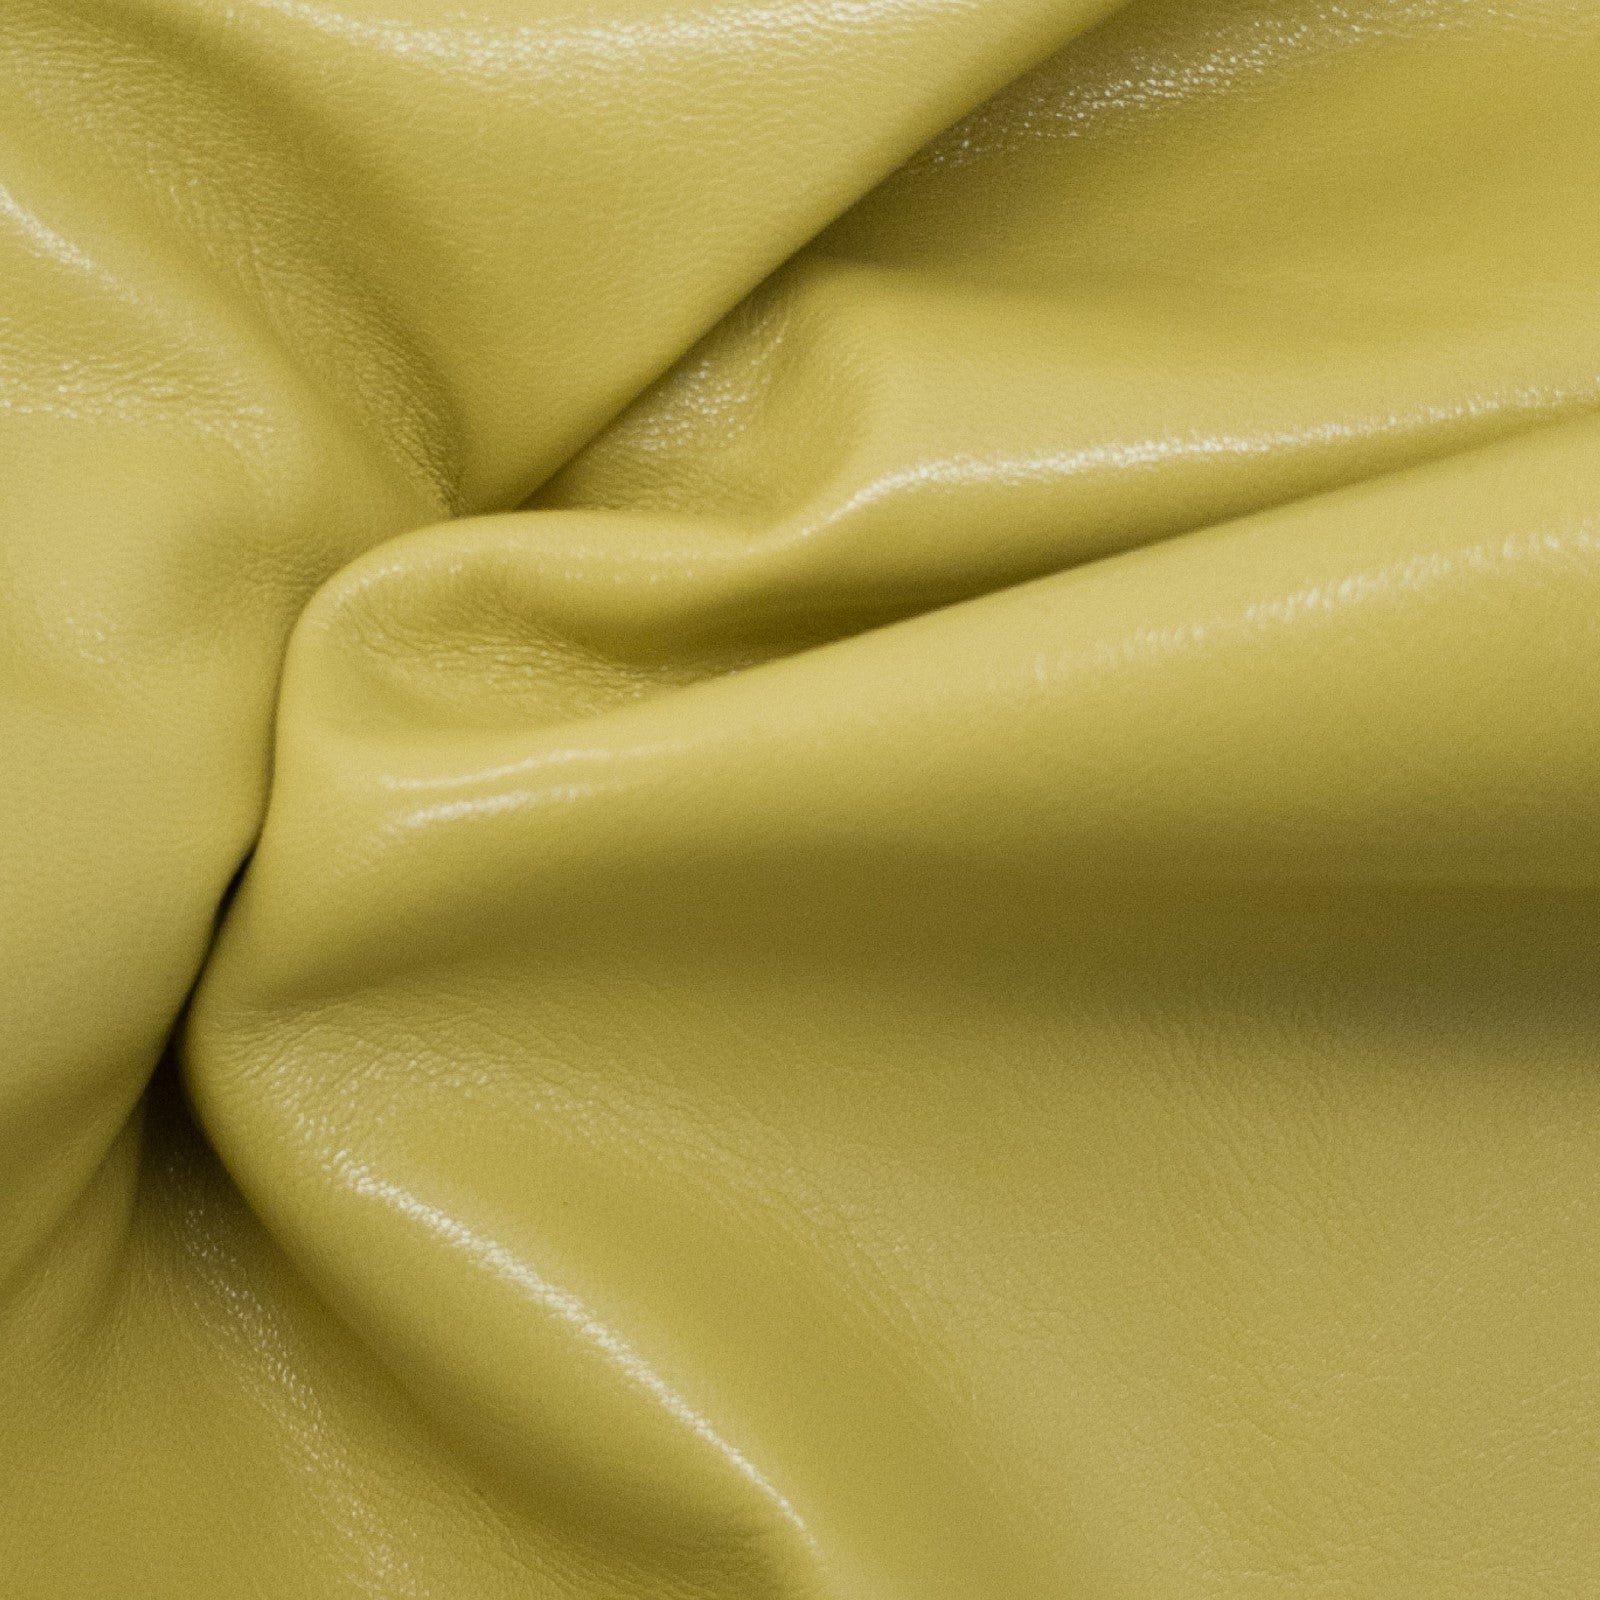 Bold and Basic, 4-7 Sq Ft, 1-3 oz, Lamb Hides, Pale Yellow | The Leather Guy